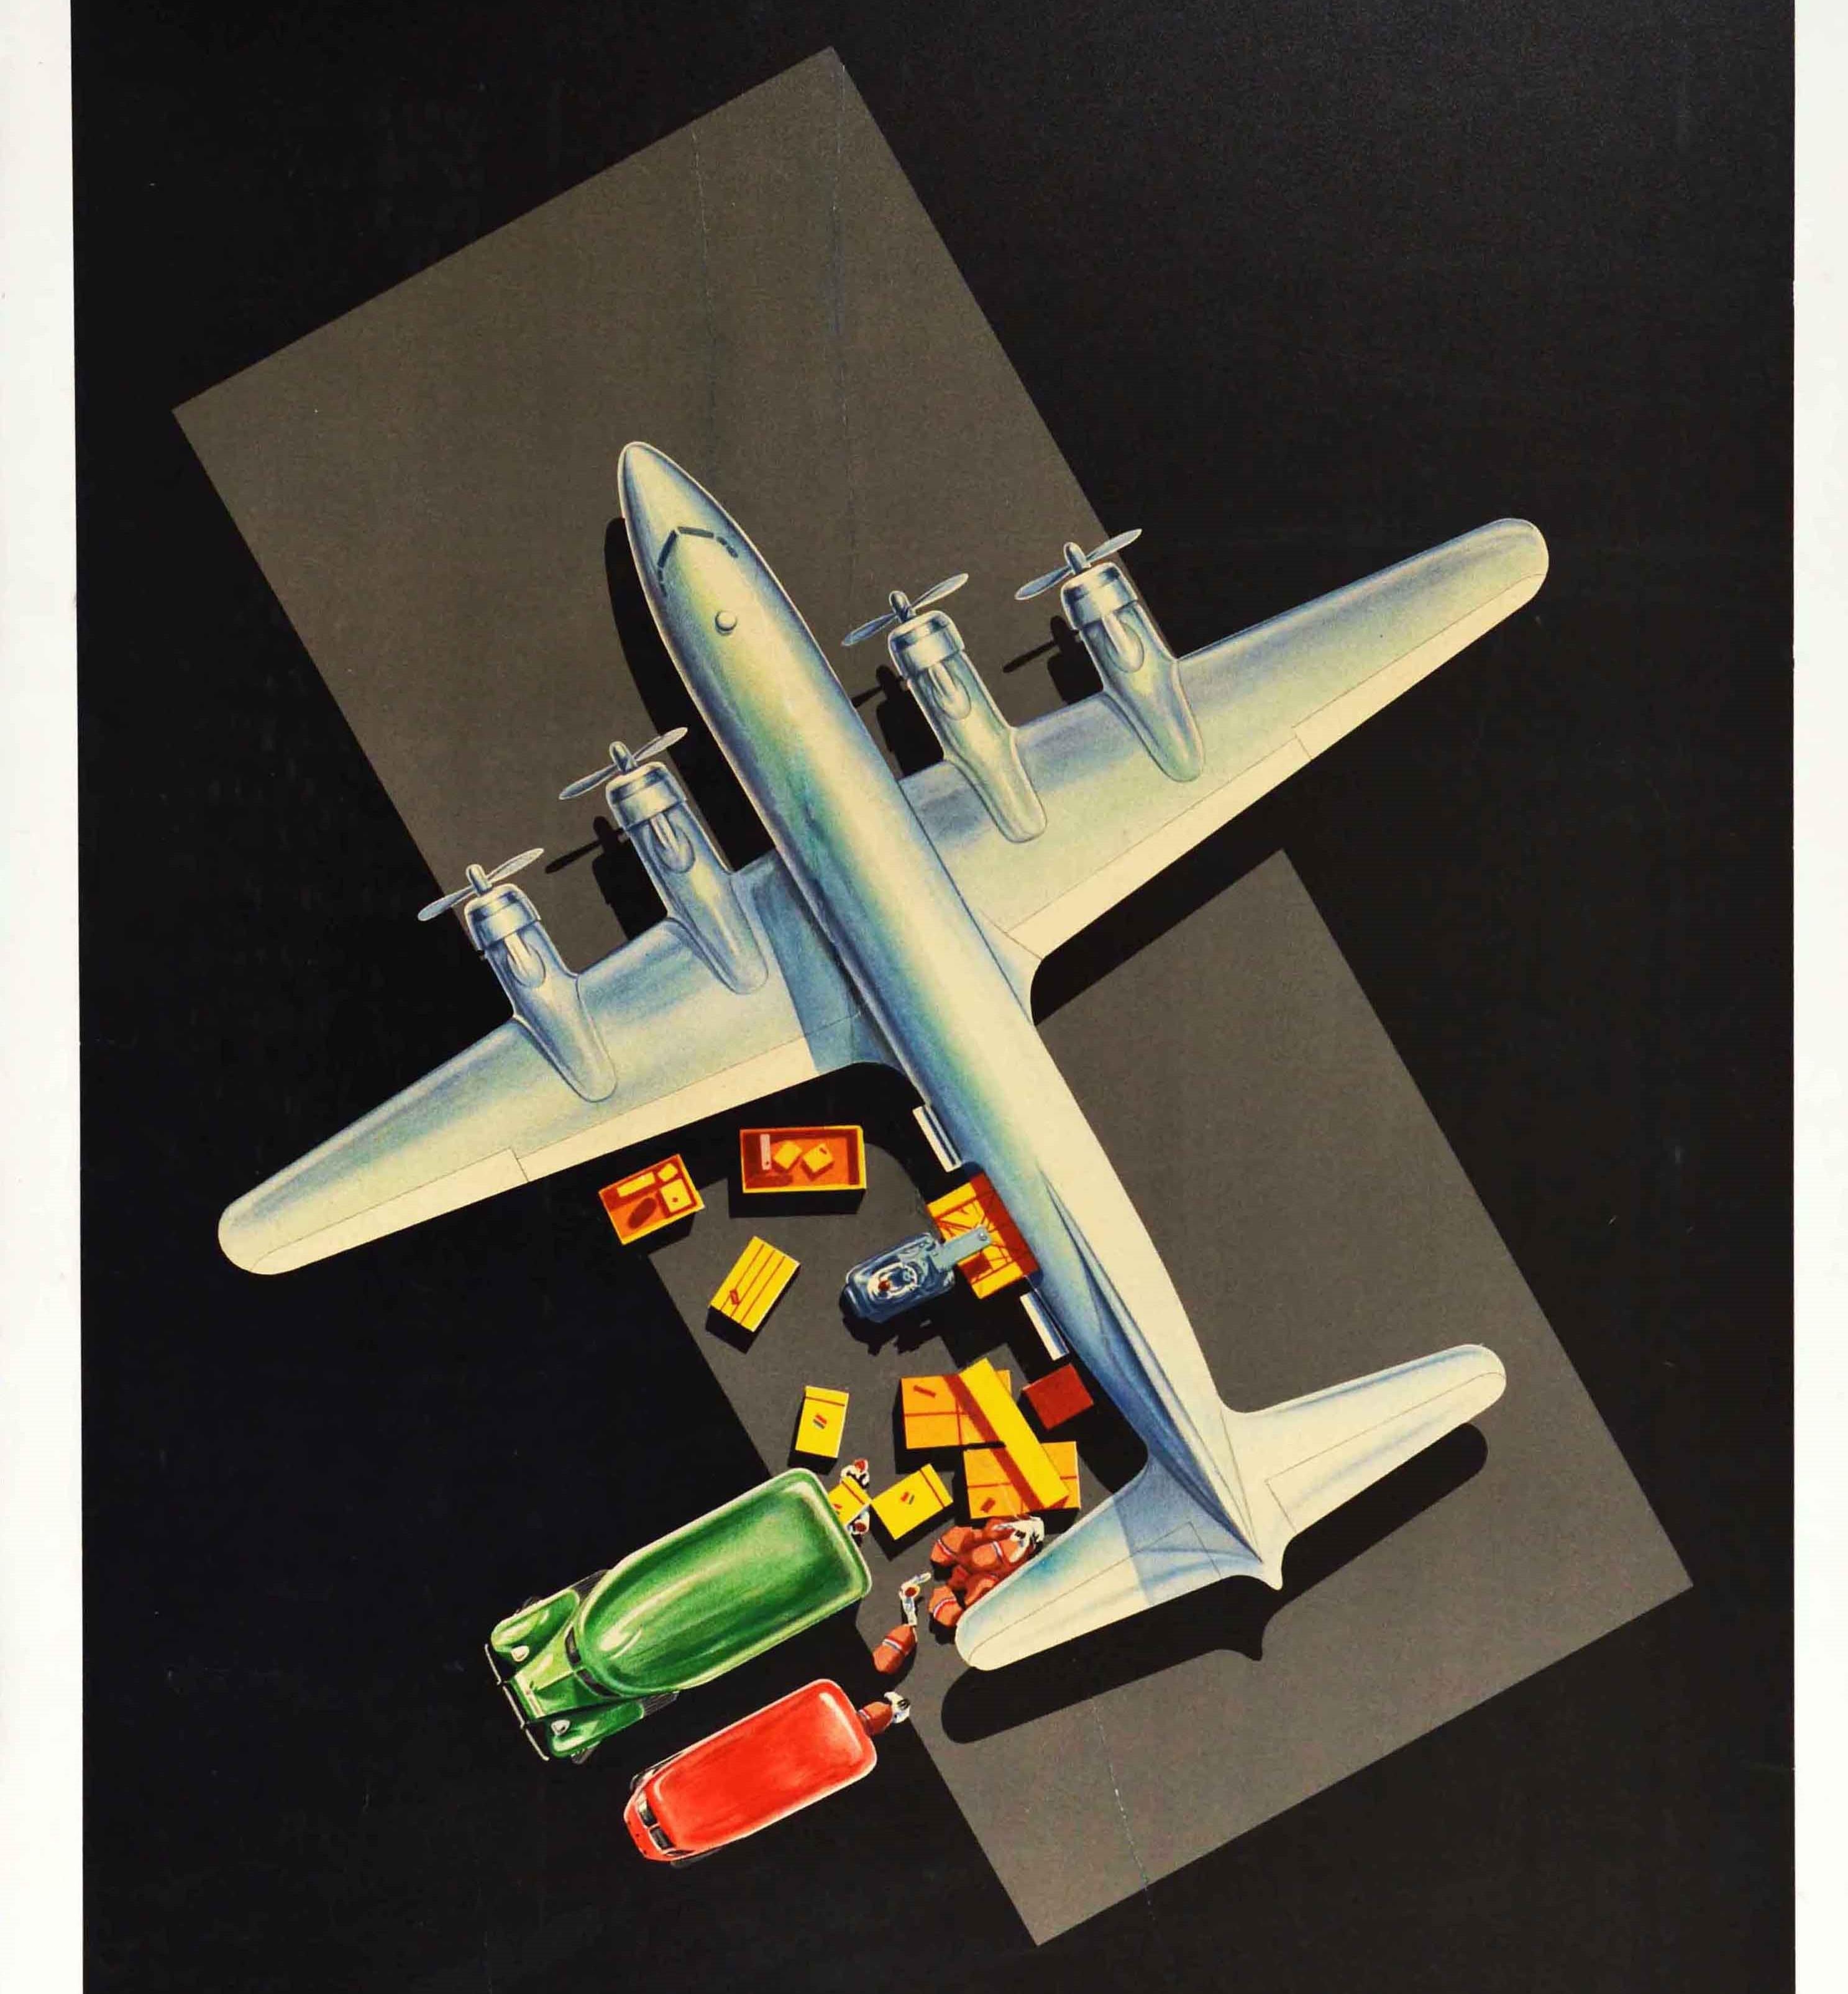 Mid-Century Modern Original Vintage Poster Your Freight By KLM Royal Dutch Airlines Midcentury Art For Sale